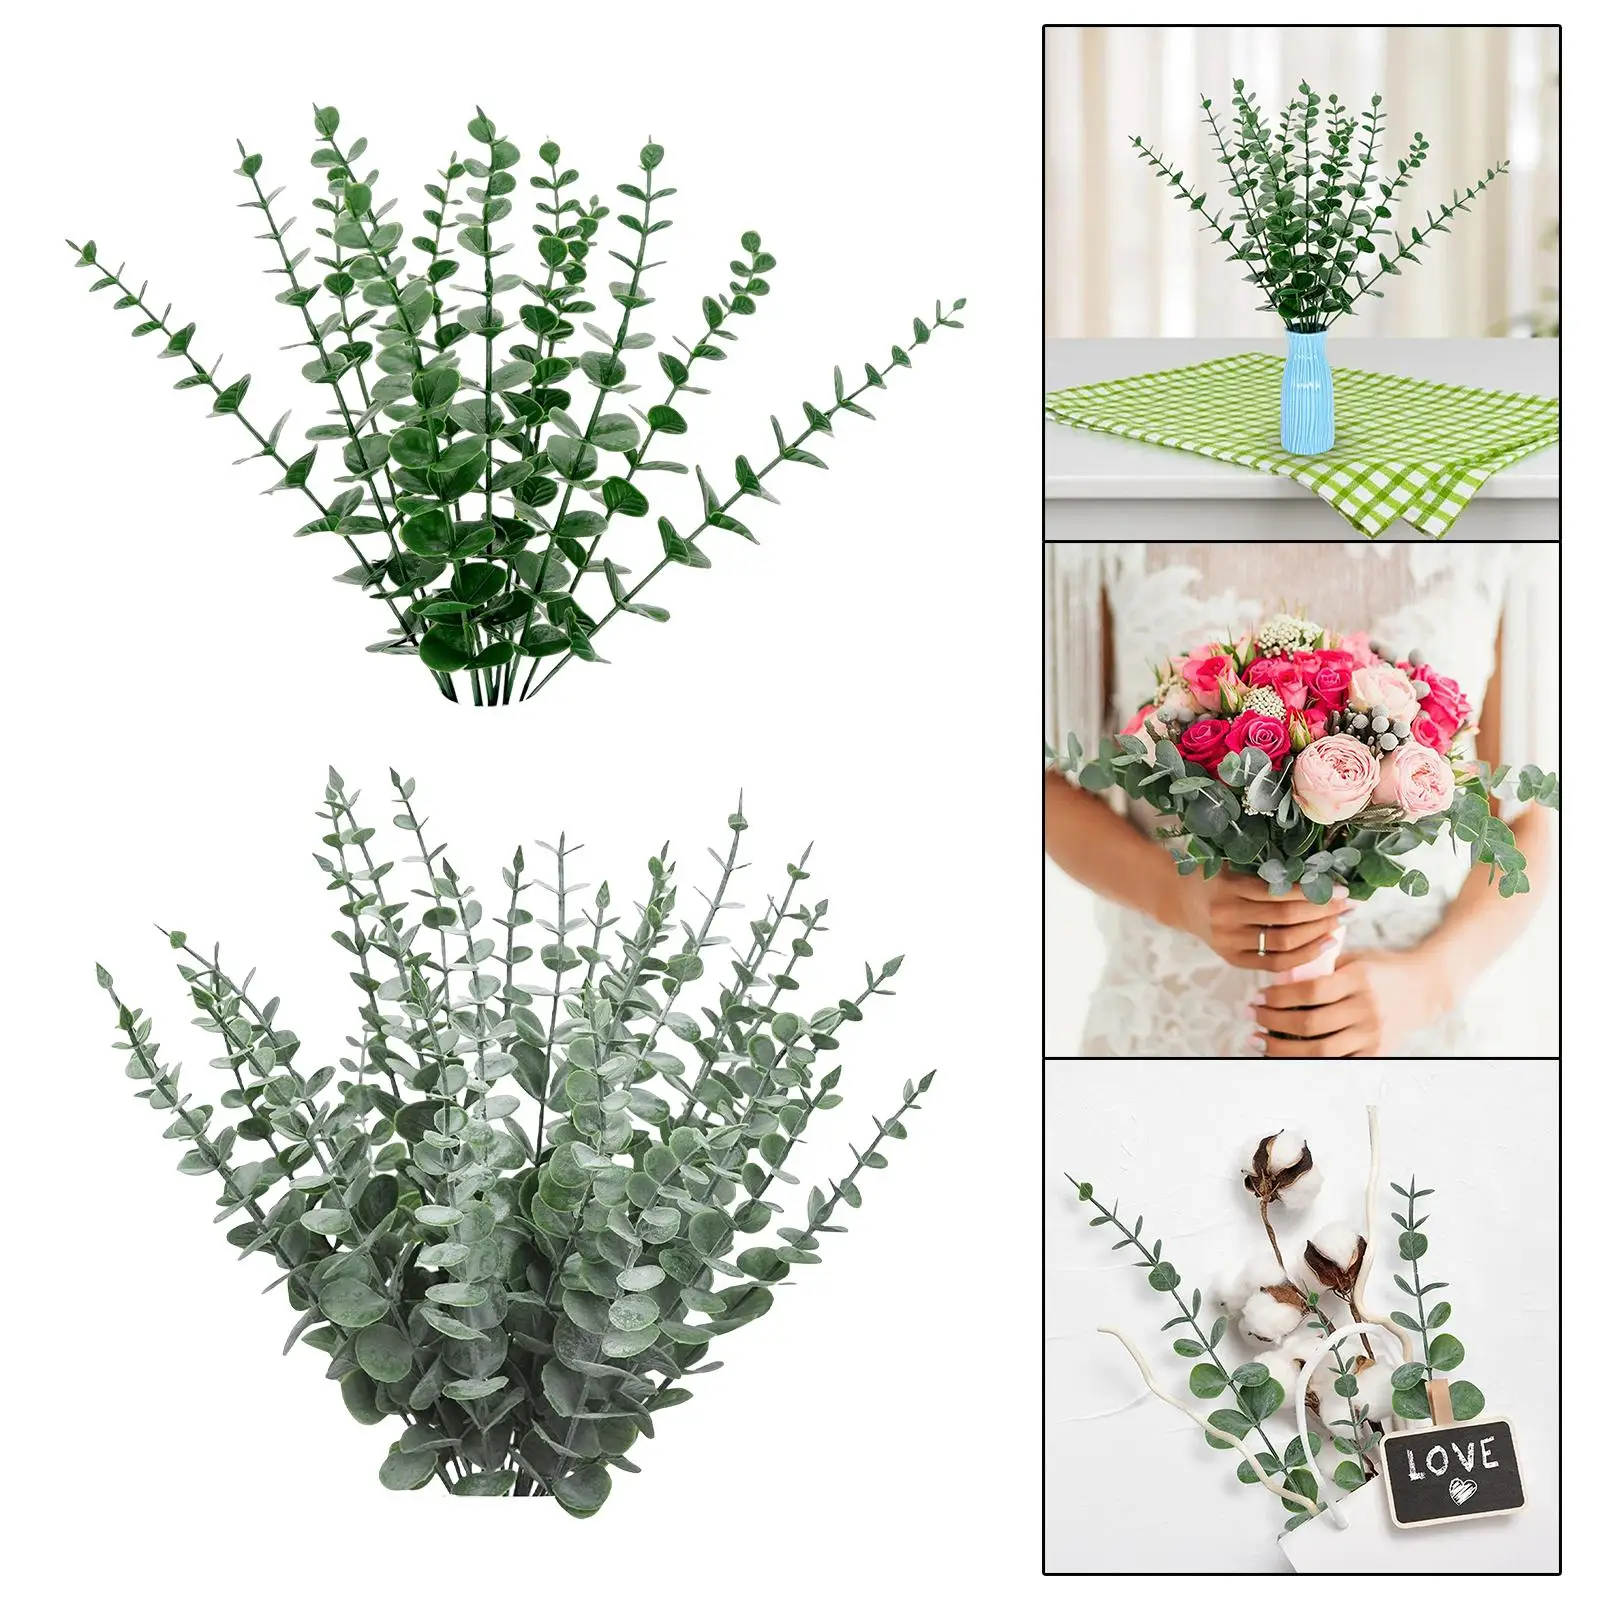 30Pcs Artificial Eucalyptus Leaves Garland Branches Faux Greenery Eucalyptus Stems for Table Home Centerpiece Indoor Decoration